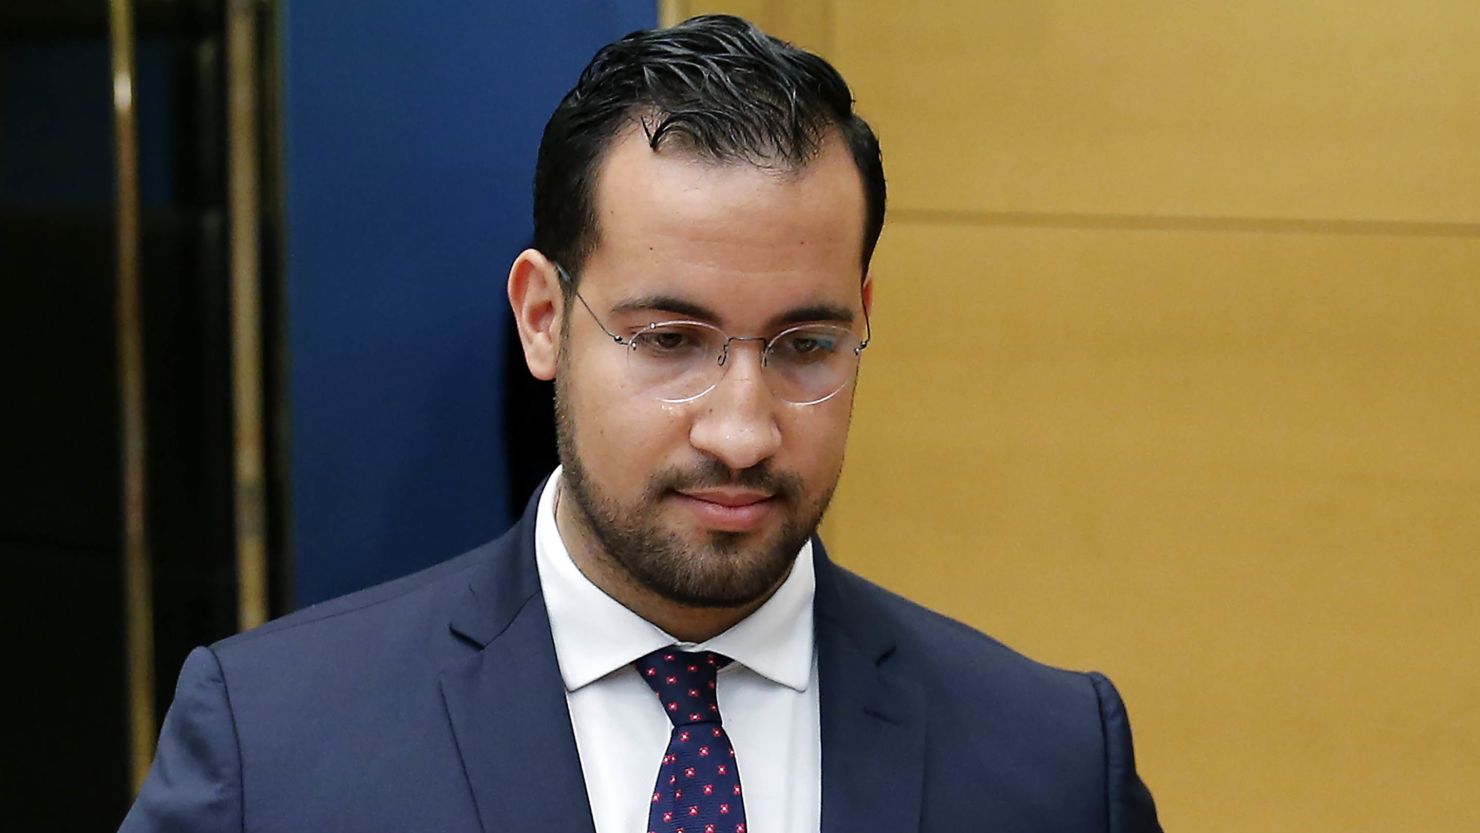  Alexandre Benalla attends a hearing by senators on September 19, 2018 in Paris after a video showed him wearing police uniform while attacking protesters during May Day demonstrations.